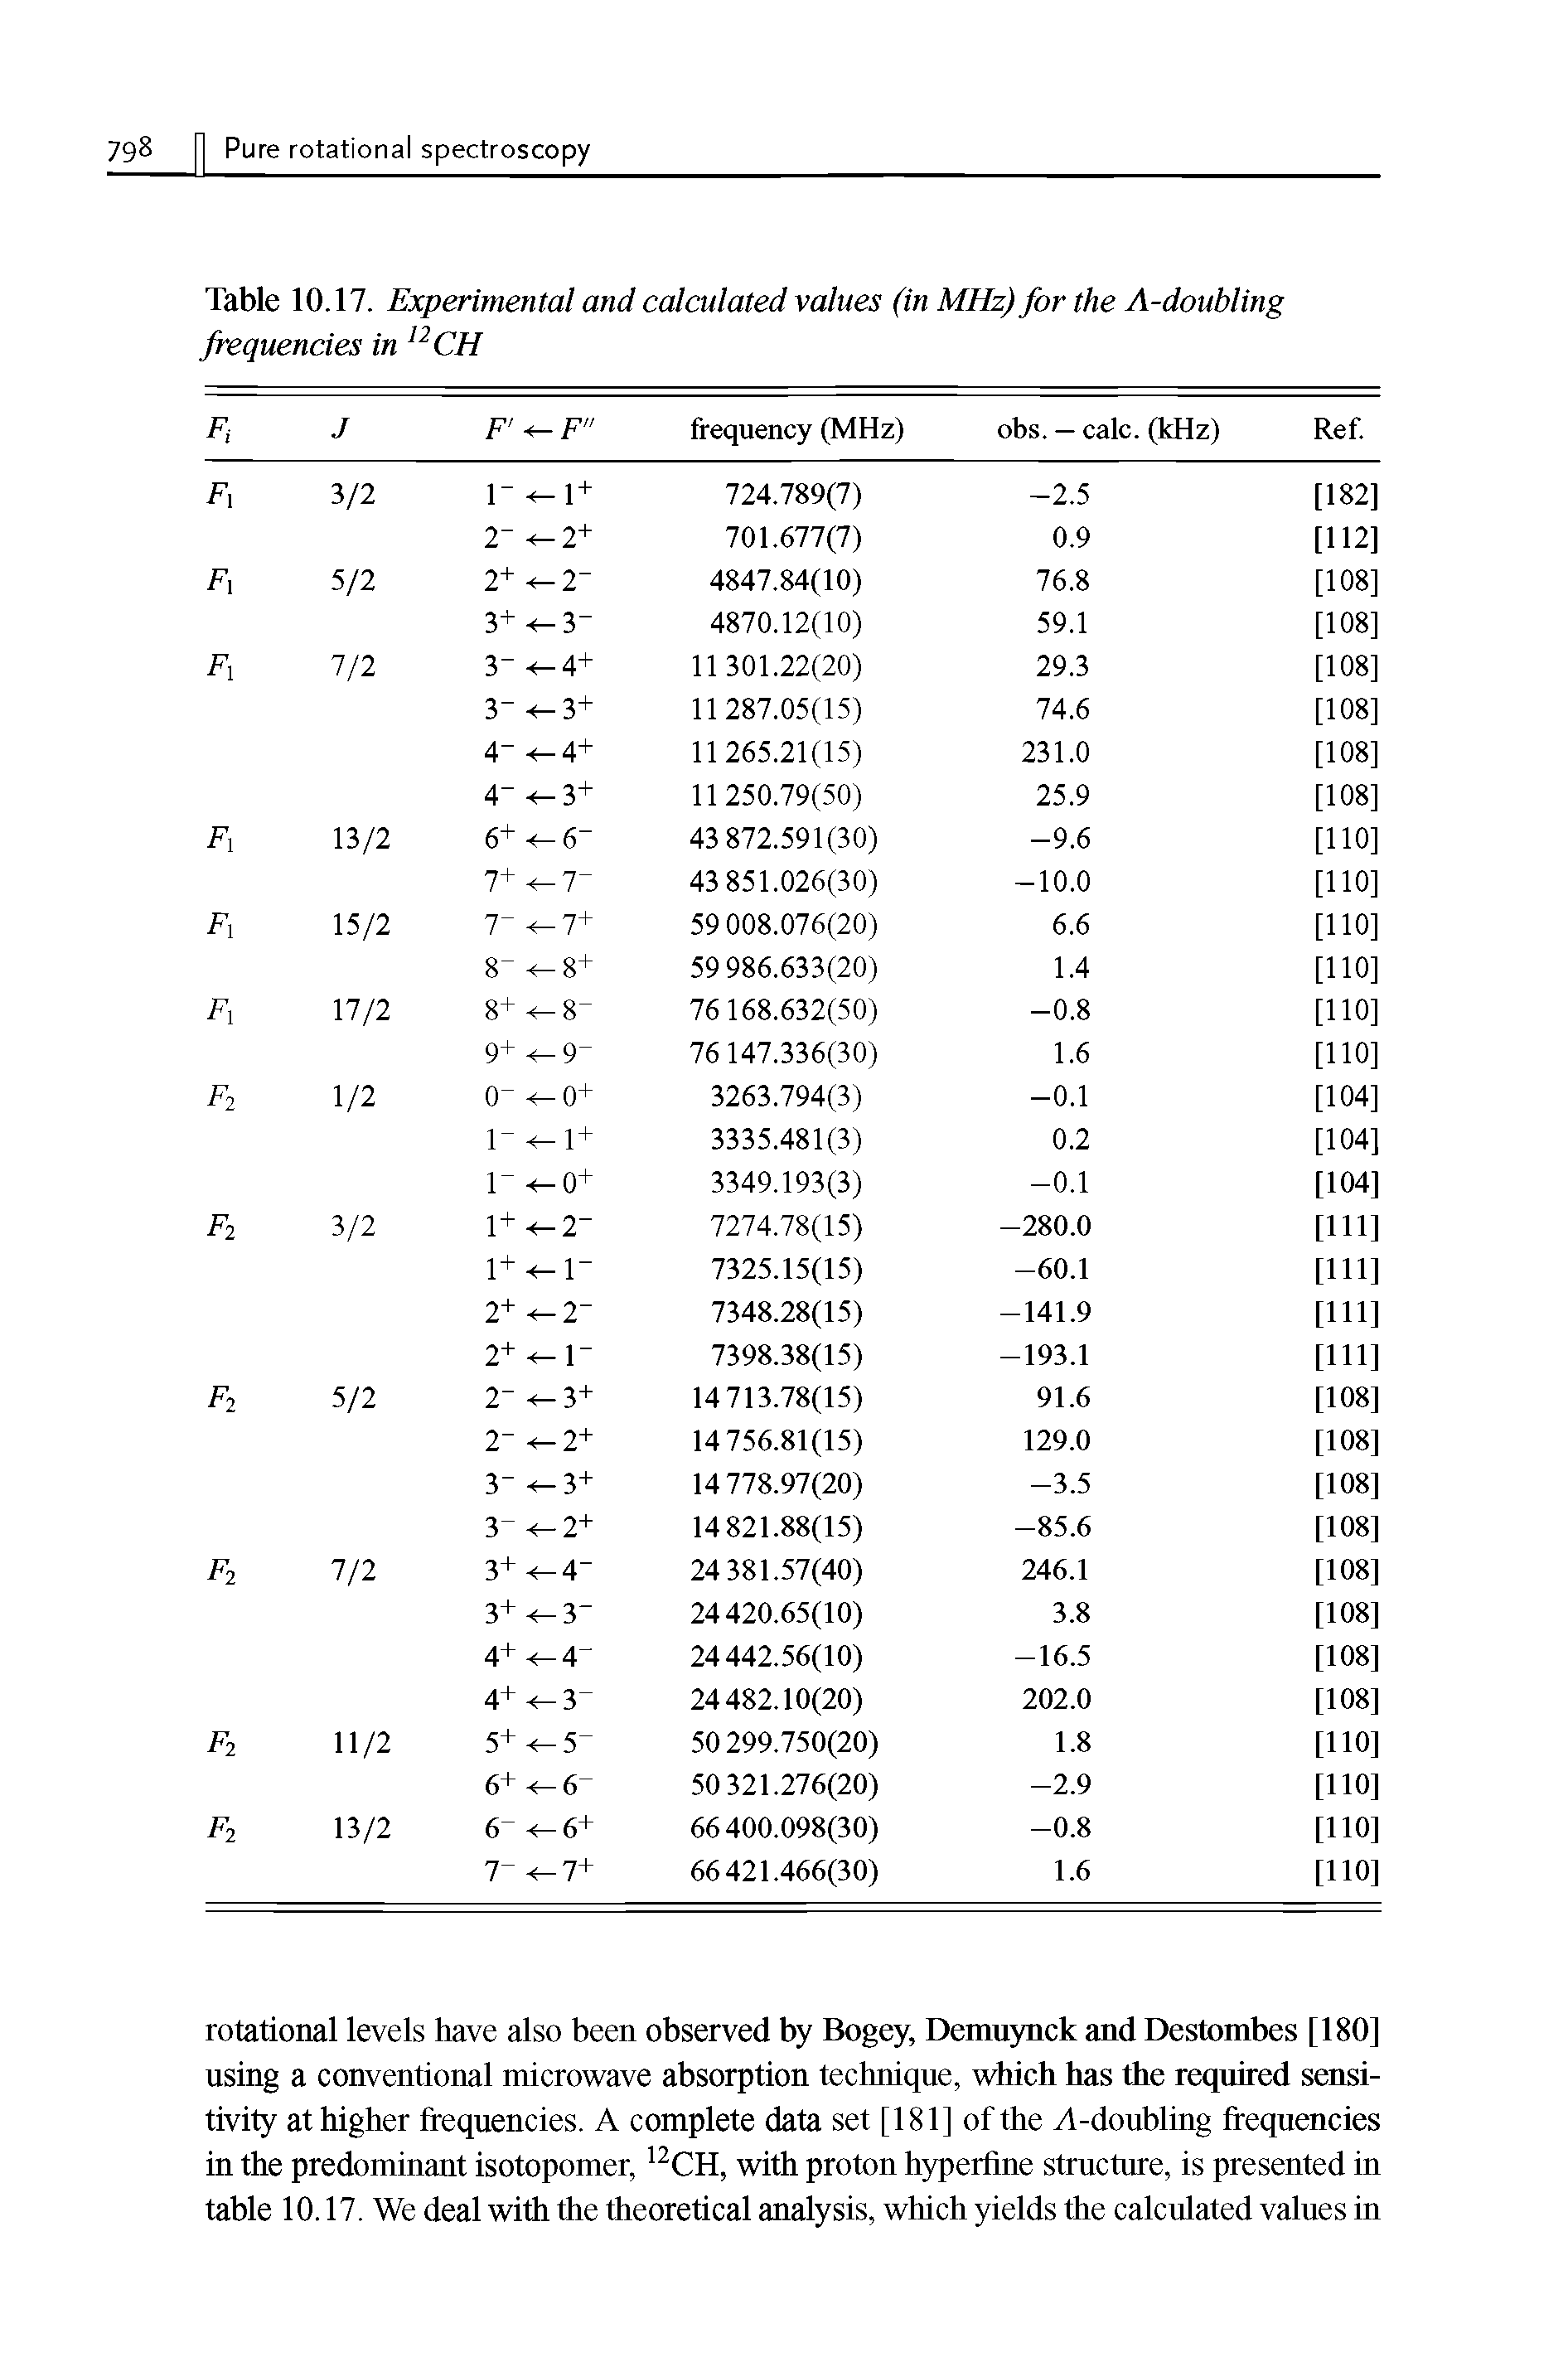 Table 10.17. Experimental and calculated values (in MHz) for the A-doubling frequencies in 12 CH...